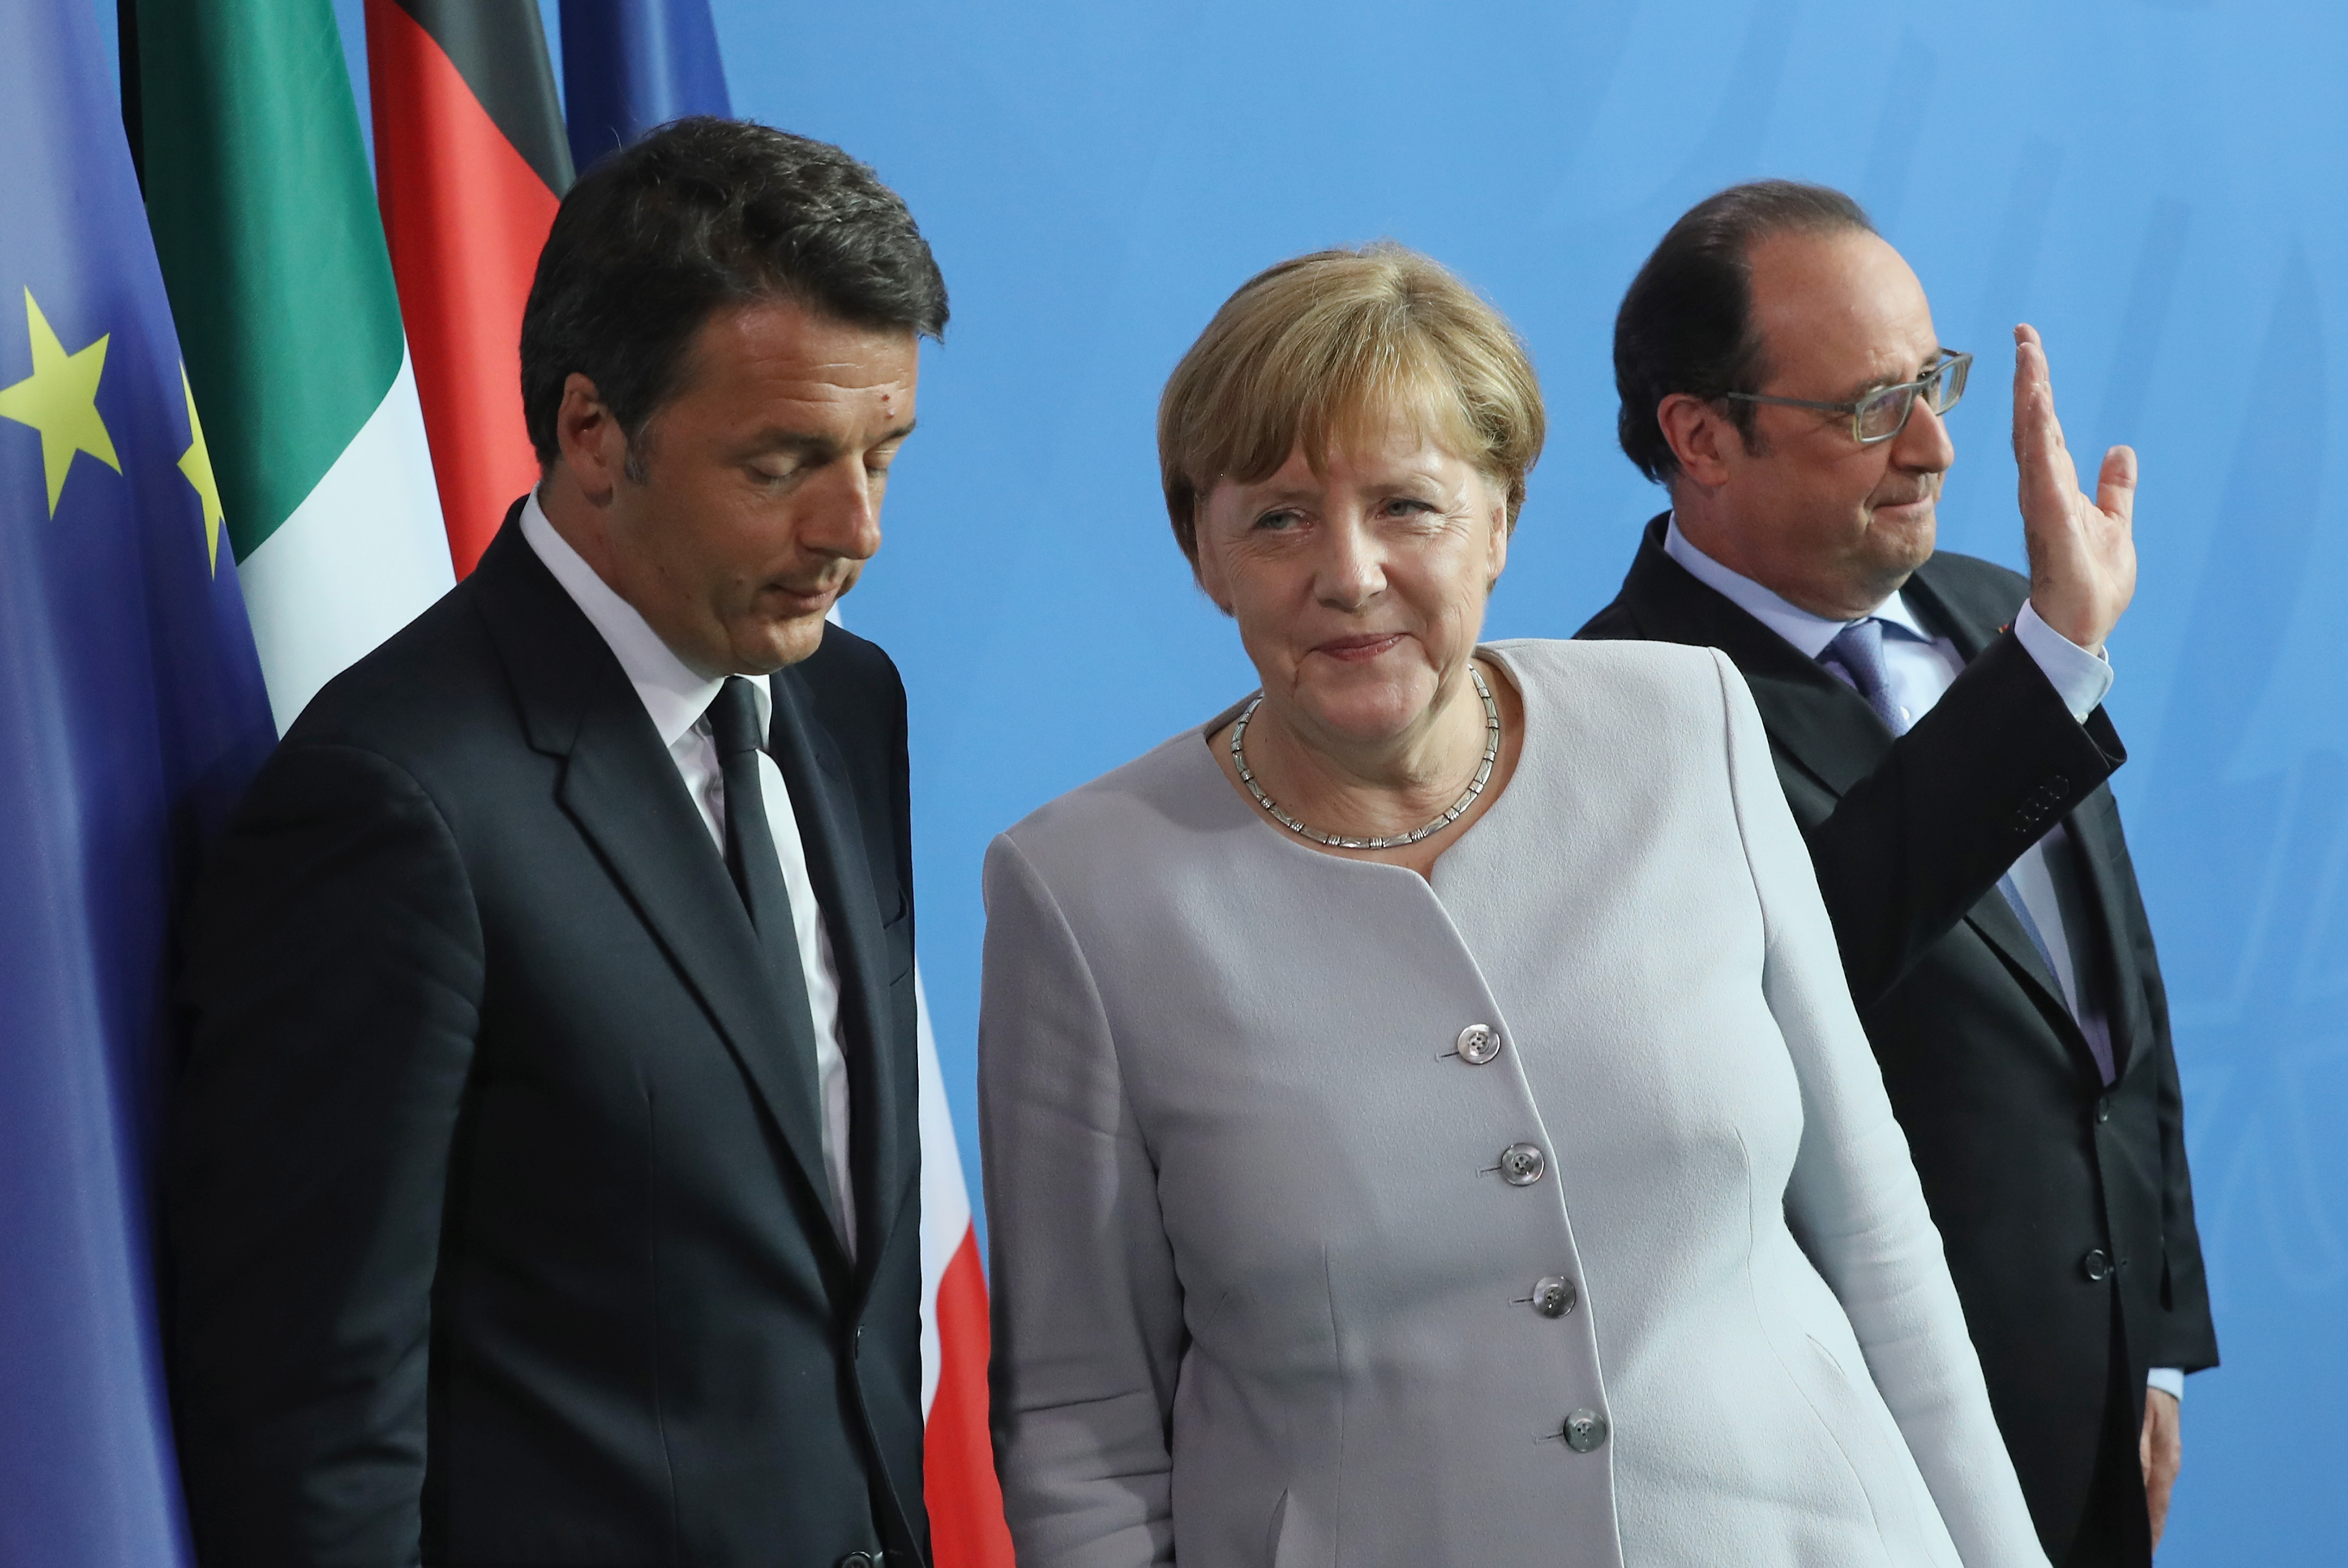 German Chancellor Angela Merkel, French President Francois Hollande (R) and Italian Prime Minister Matteo Renzi depart after speaking to the media during talks at the Chancellery on June 27, 2016 in Berlin. (Sean Gallup—Getty Images)